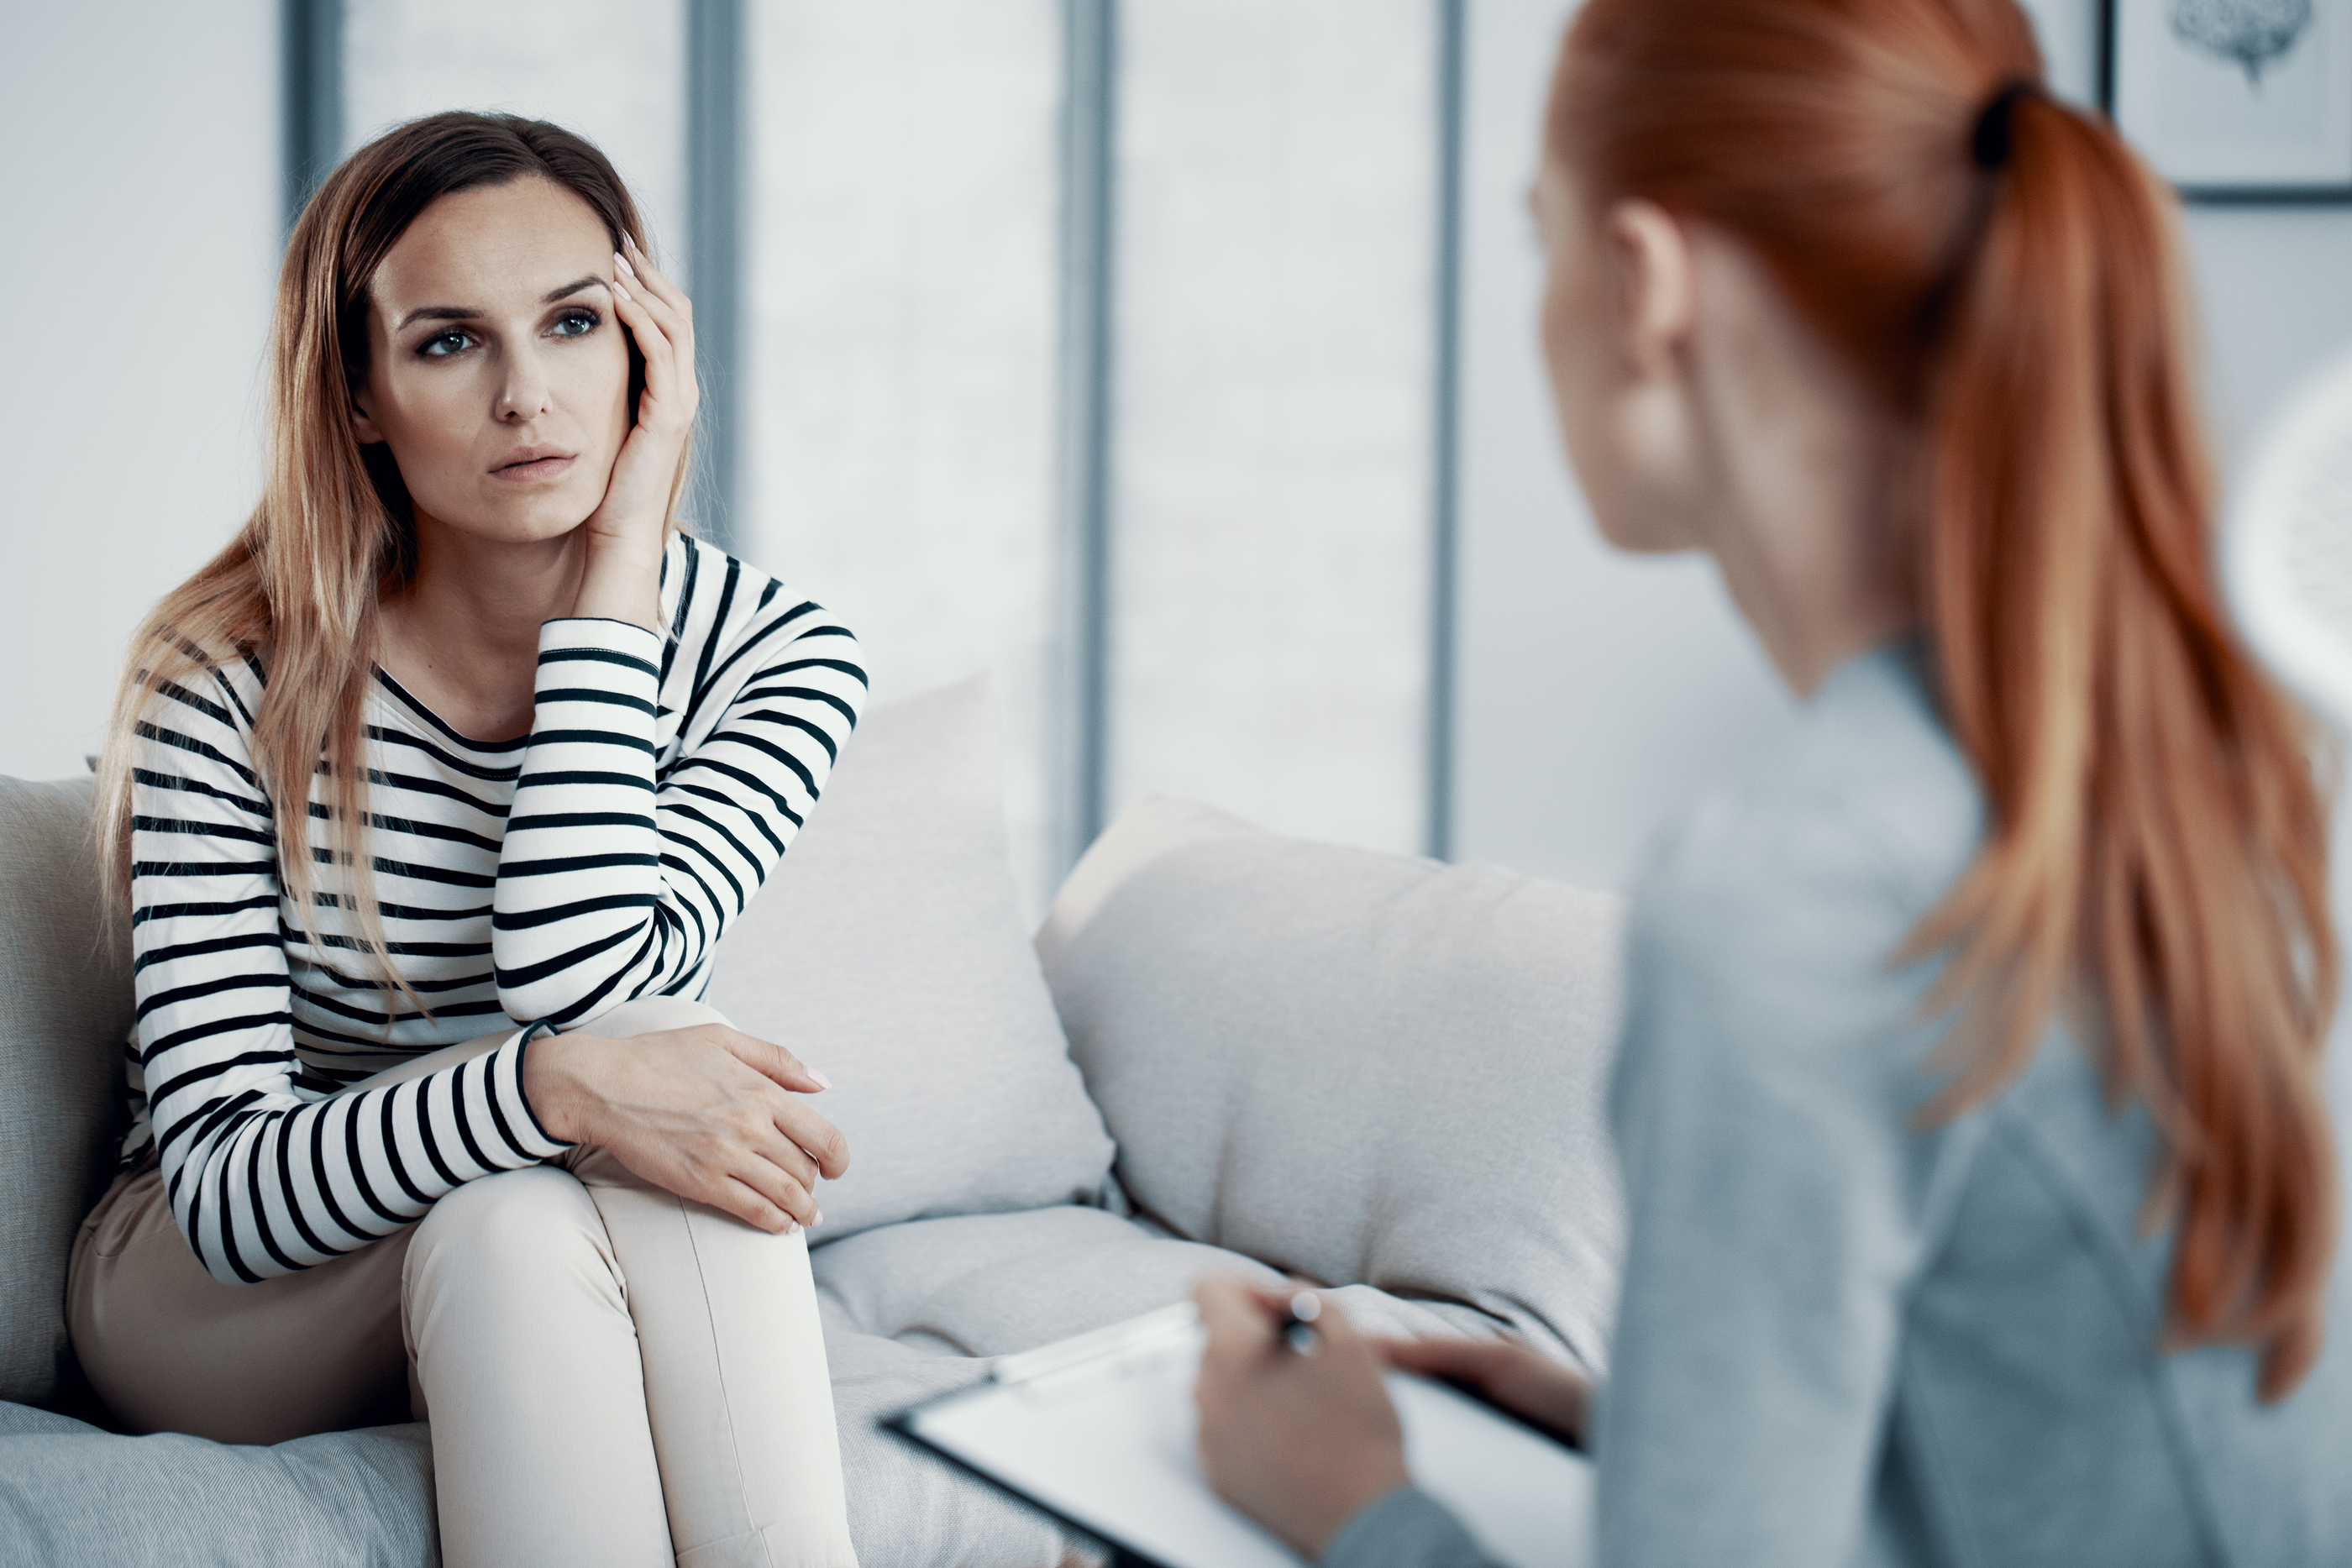 Woman with anorexia speaking with therapist